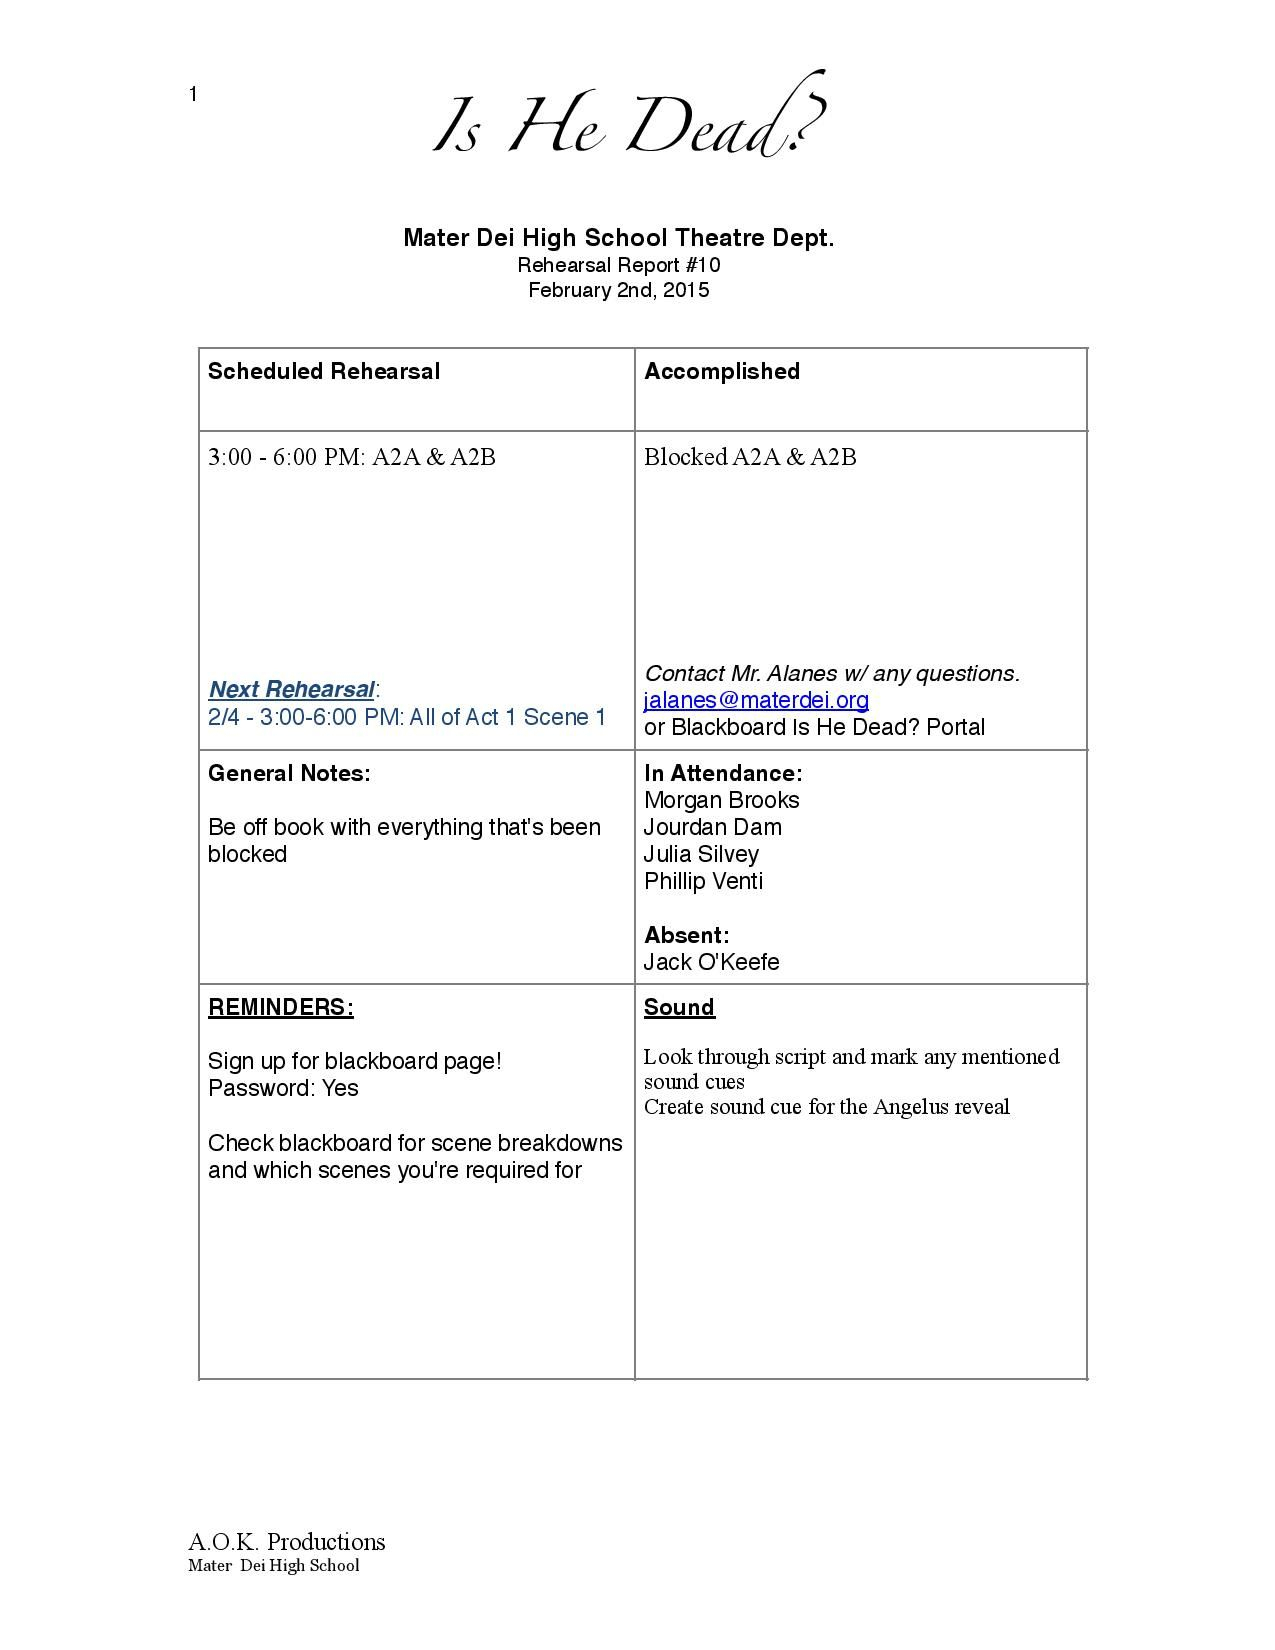 Page 1 Of Is He Dead? Rehearsal Report Example | Little Shop Within Rehearsal Report Template